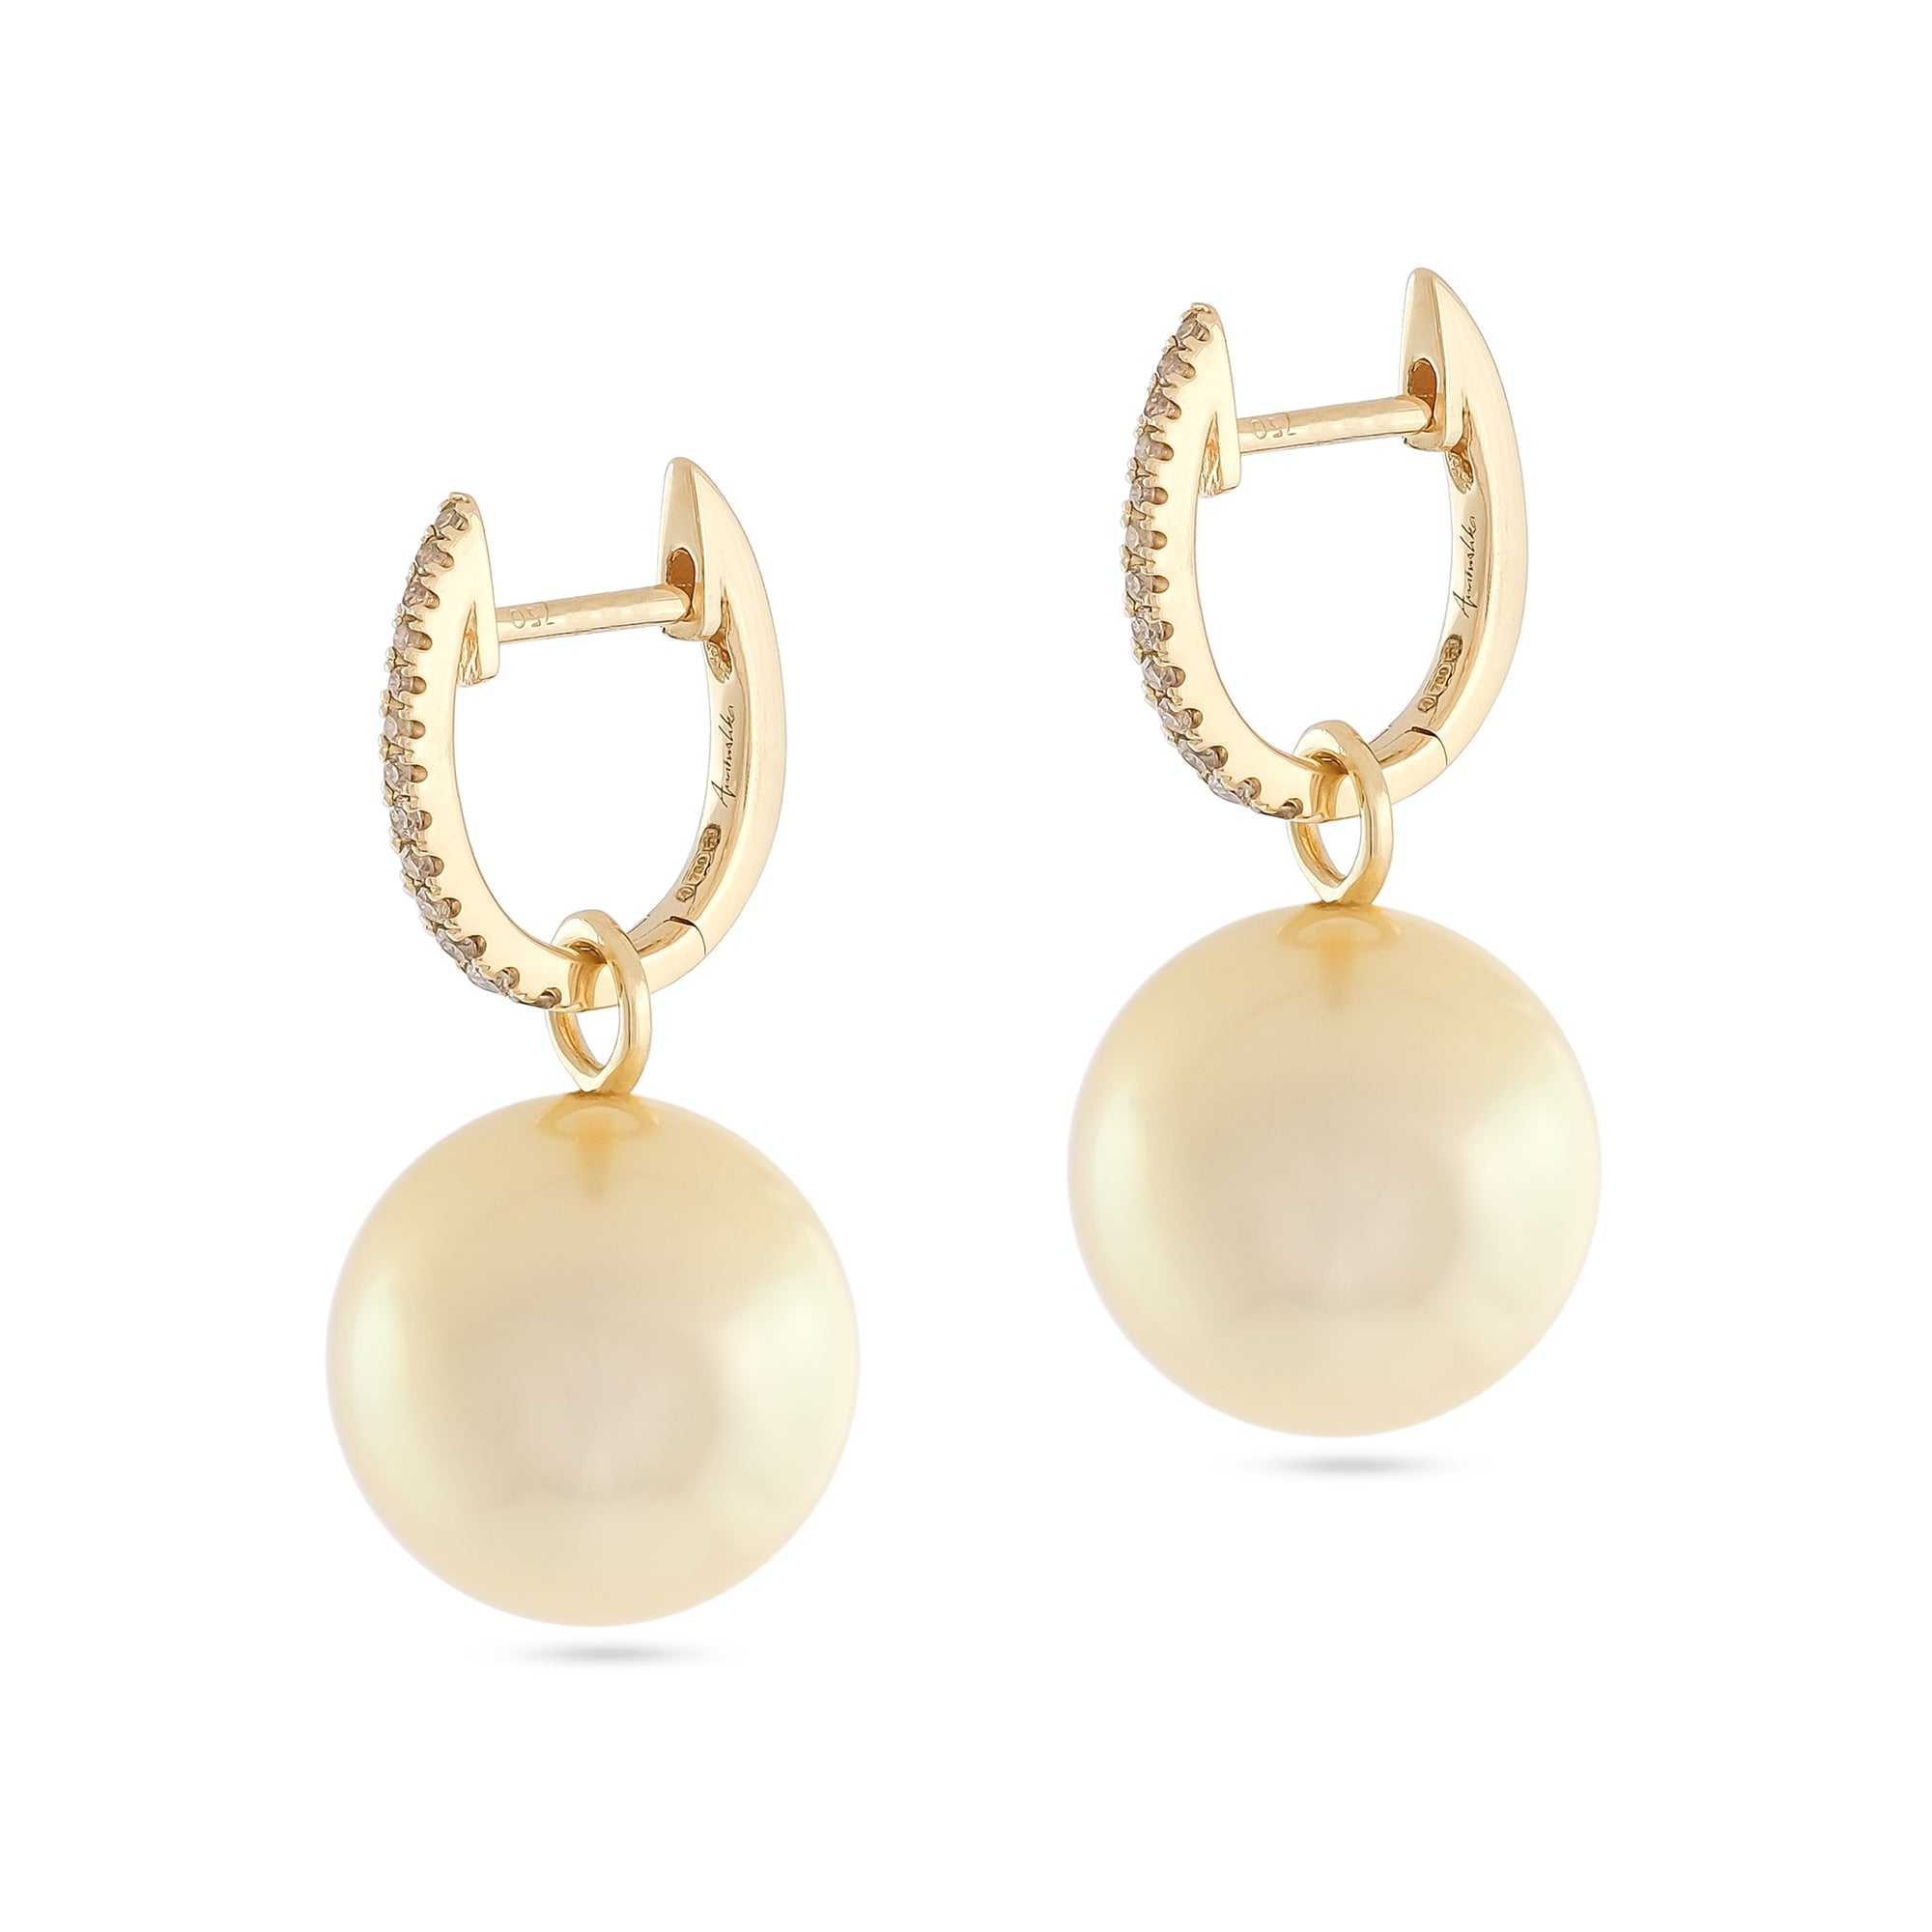 18ct Yellow Gold Diamond and Pearl Earrings